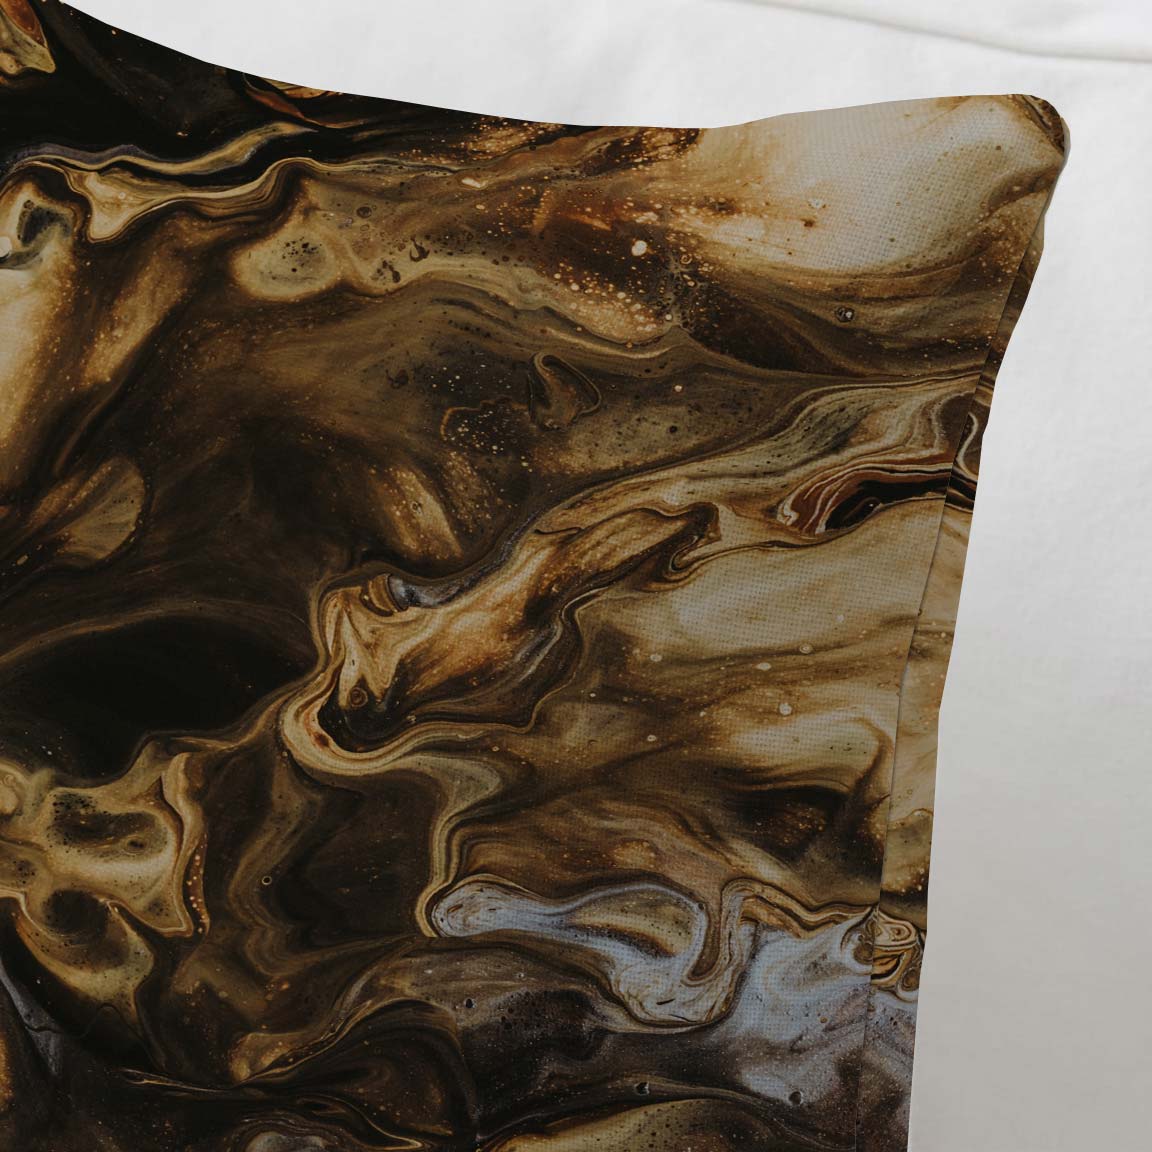 Iron Pyrite Marble-Stone Cushion Cover trendyhome-pk